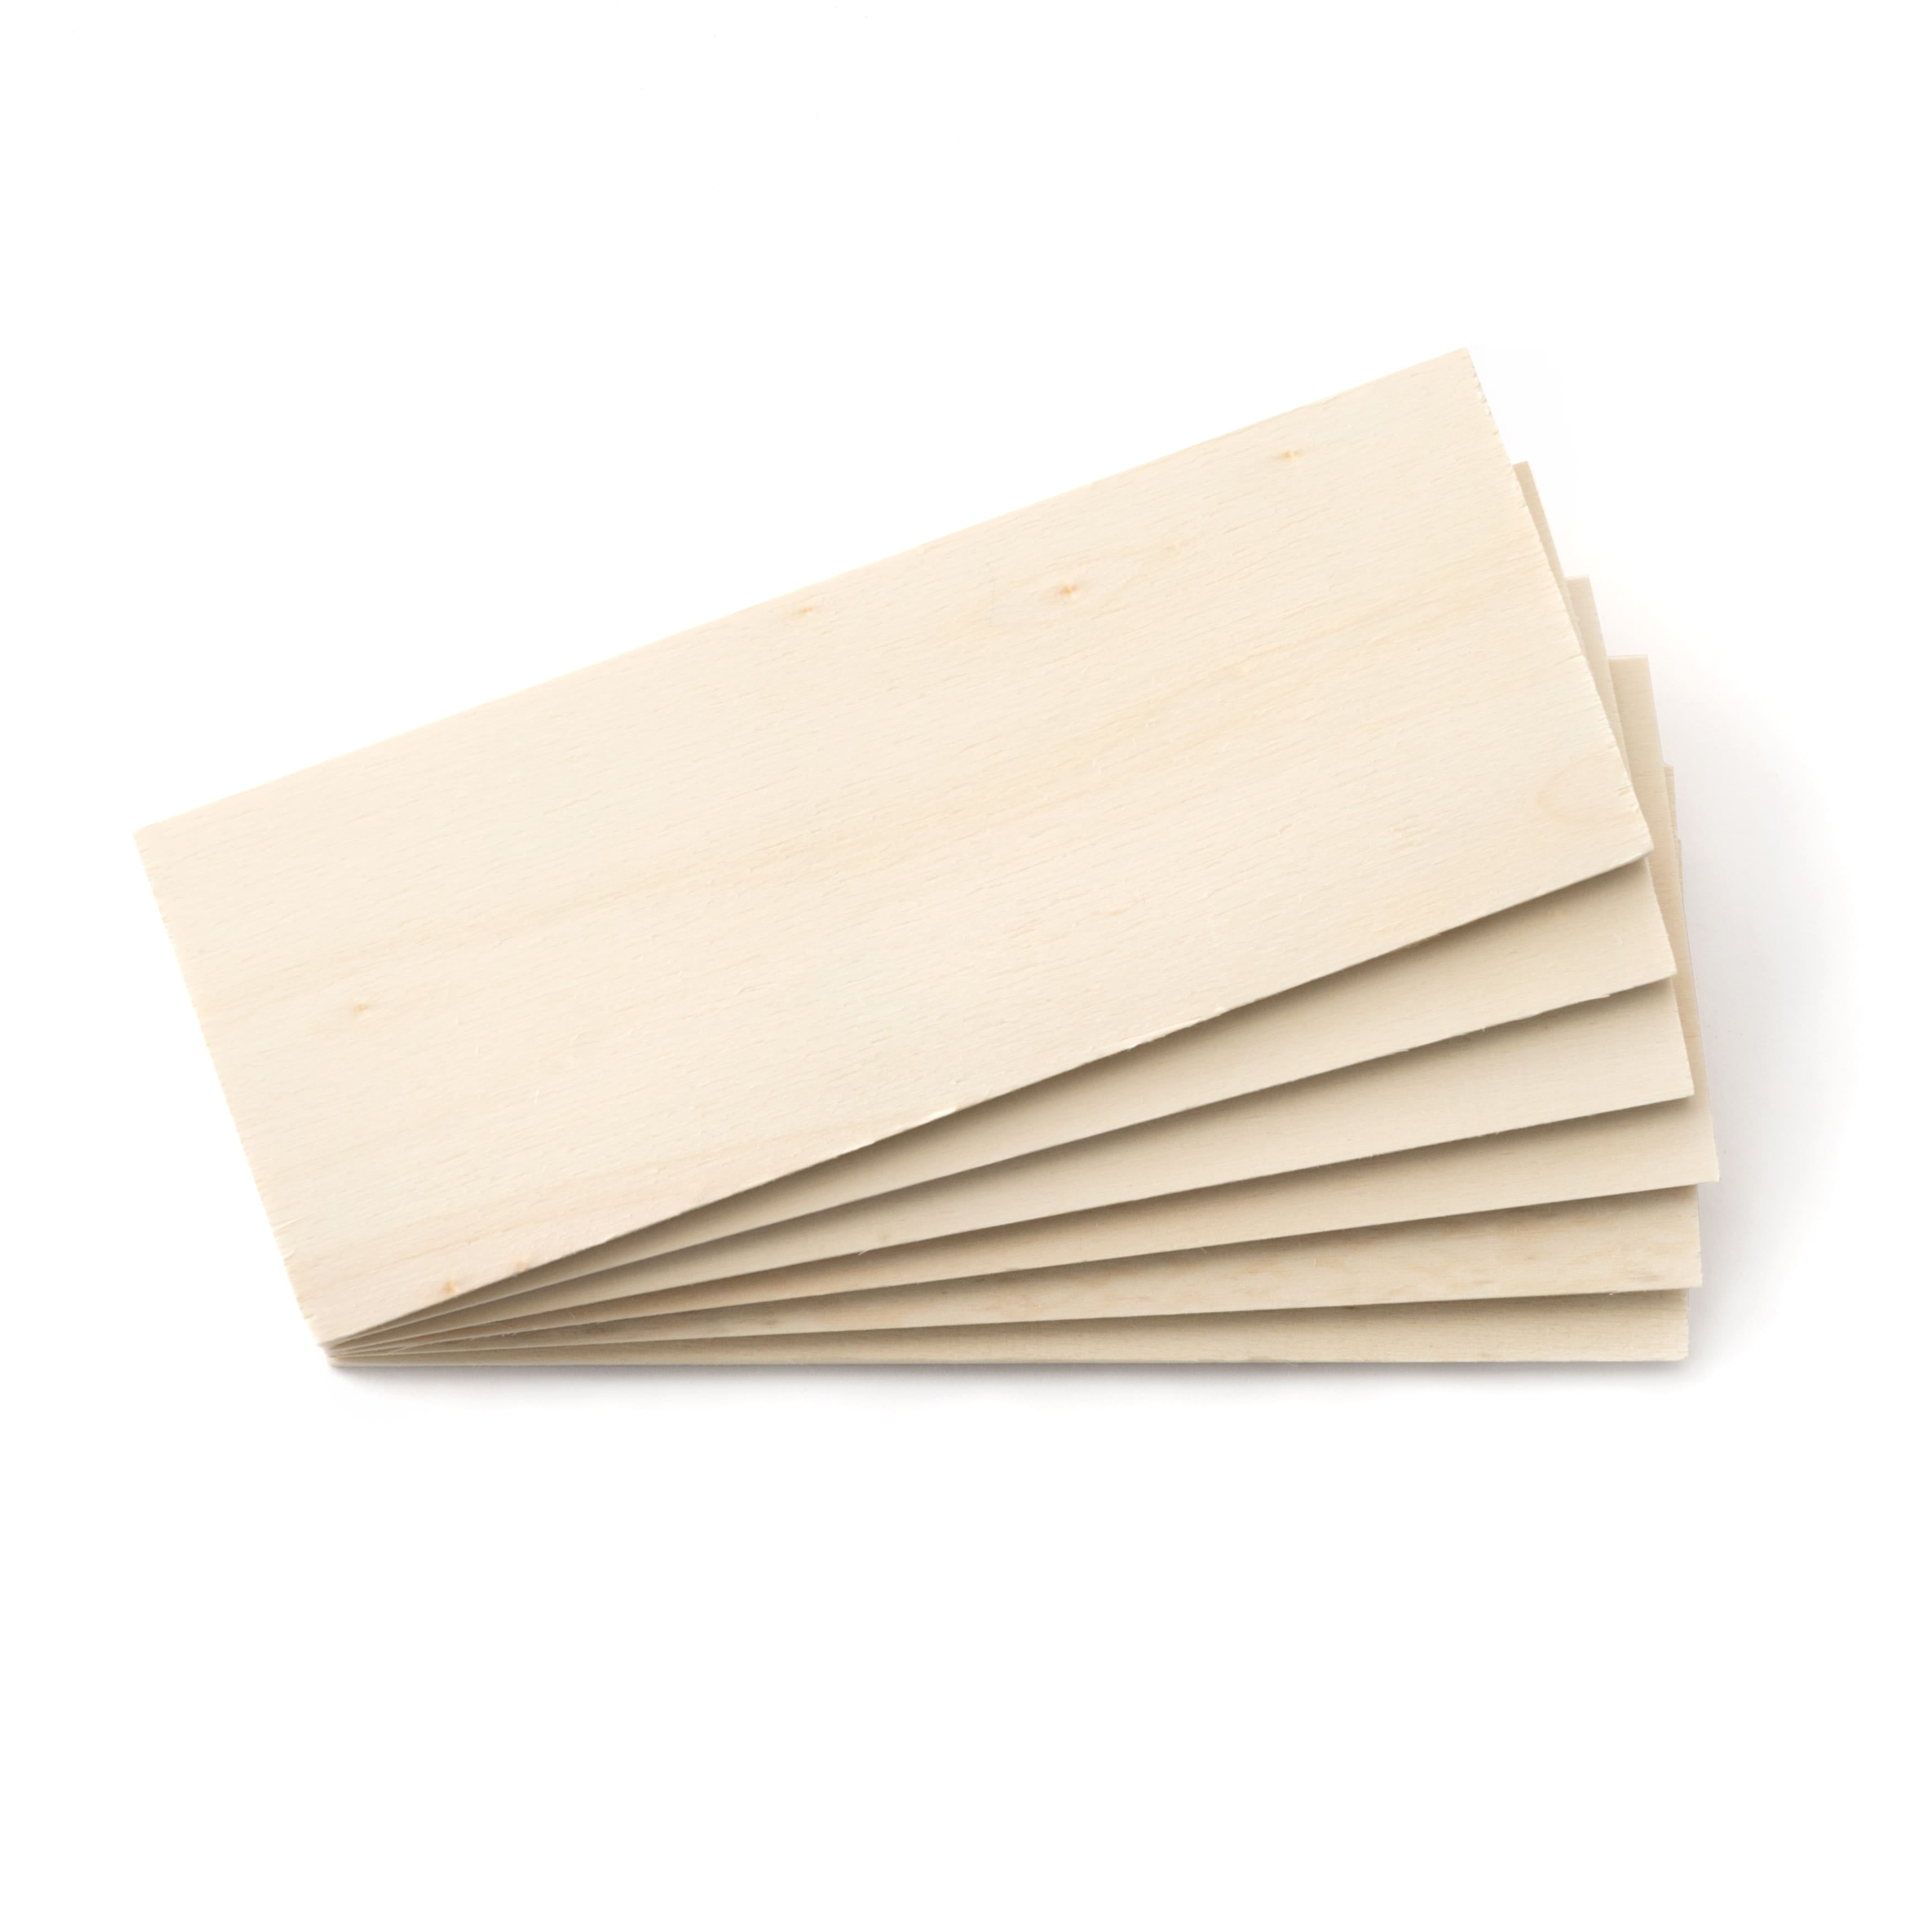 Mahogany Basswood Sheets for Crafts 1/8 inch, 3mm Plywood Sheets for Laser  Cutting & Engraving, Wood Burning, Architectural Models, Drawing - 6 Pack